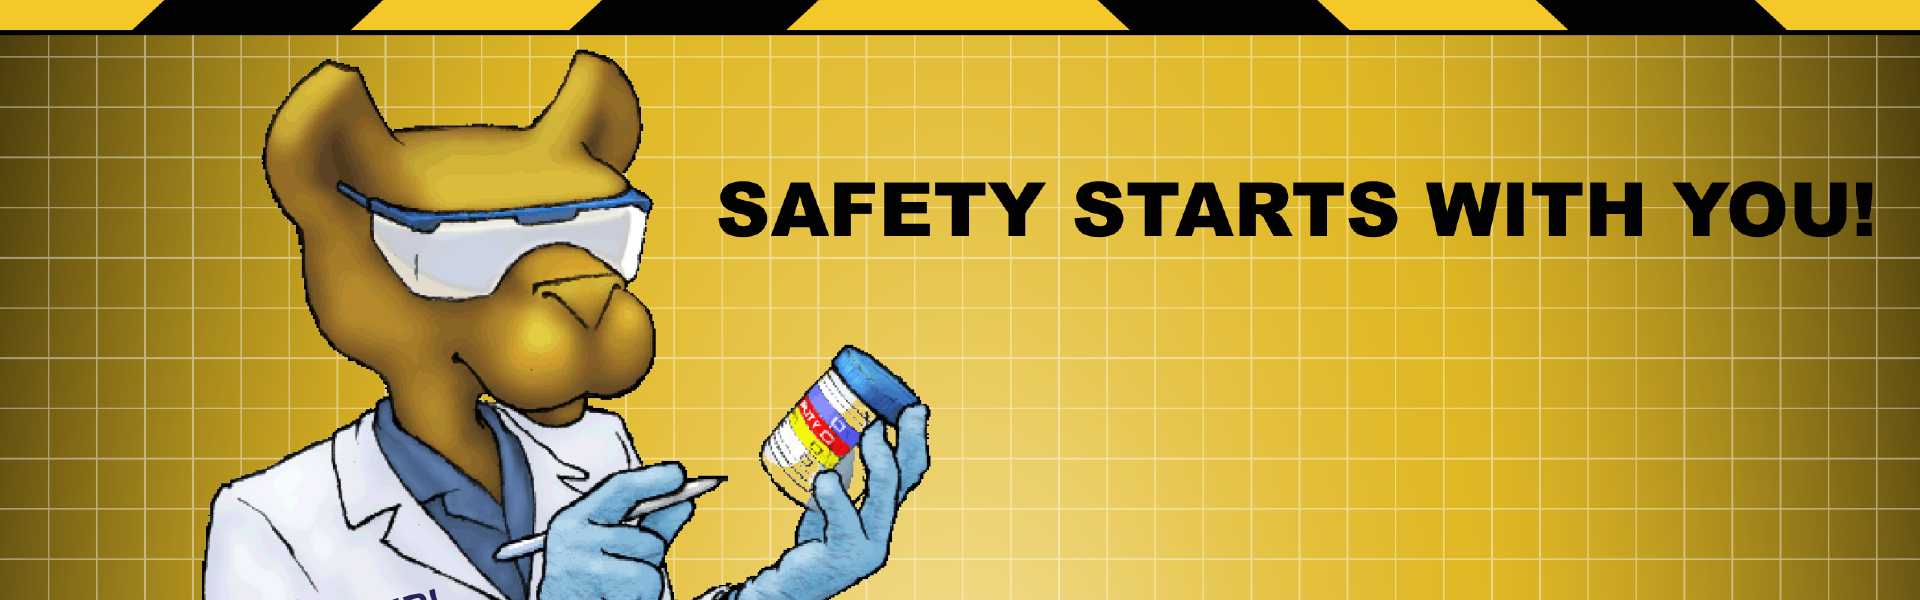 Safety starts with you